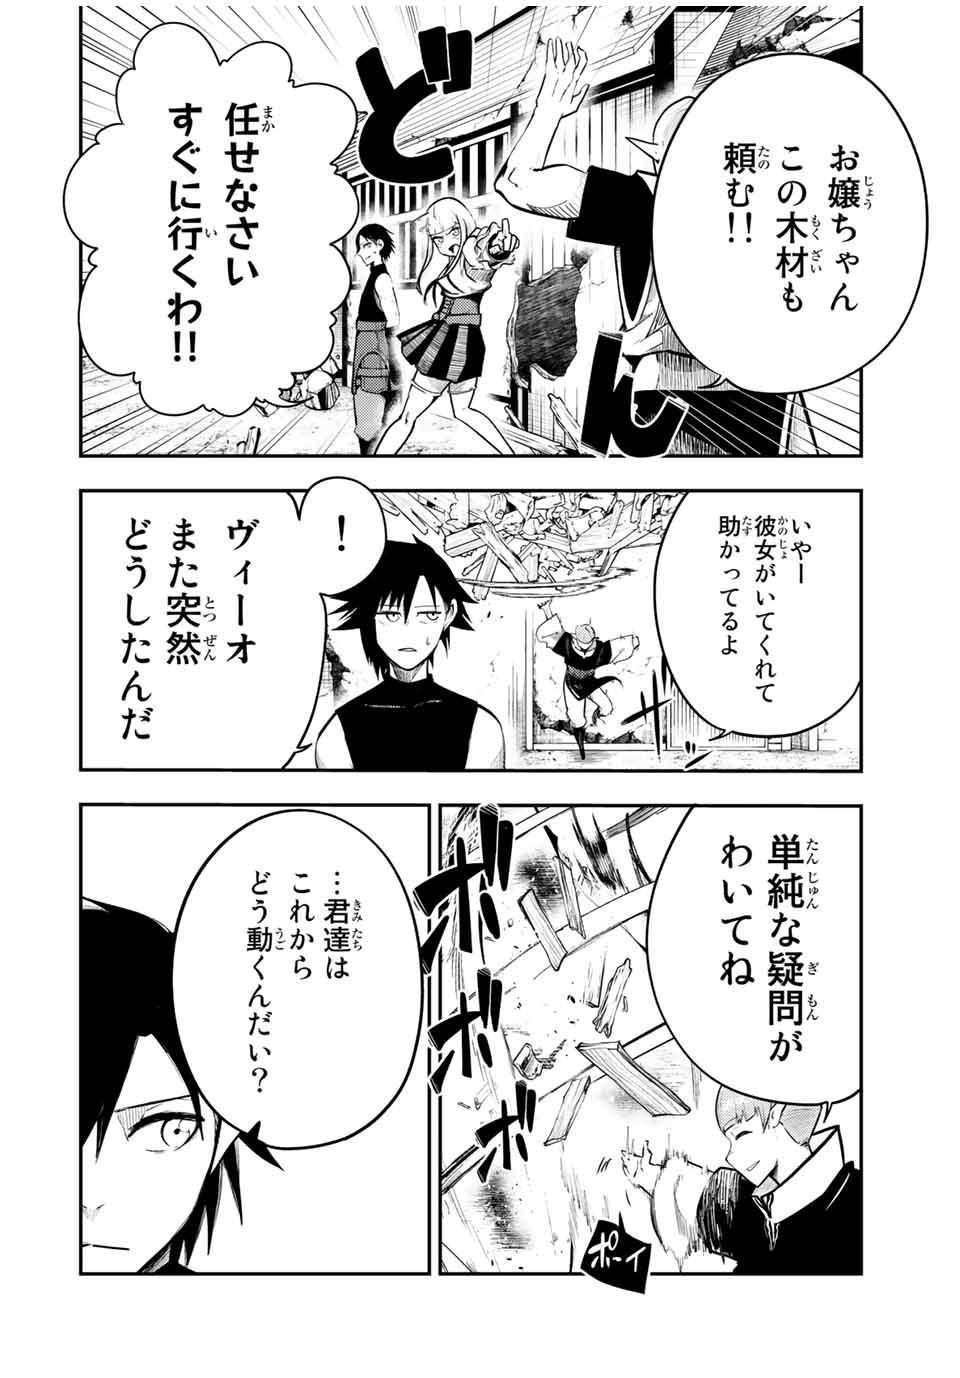 the strongest former prince-; 奴隷転生 ～その奴隷、最強の元王子につき～ 第50話 - Page 12